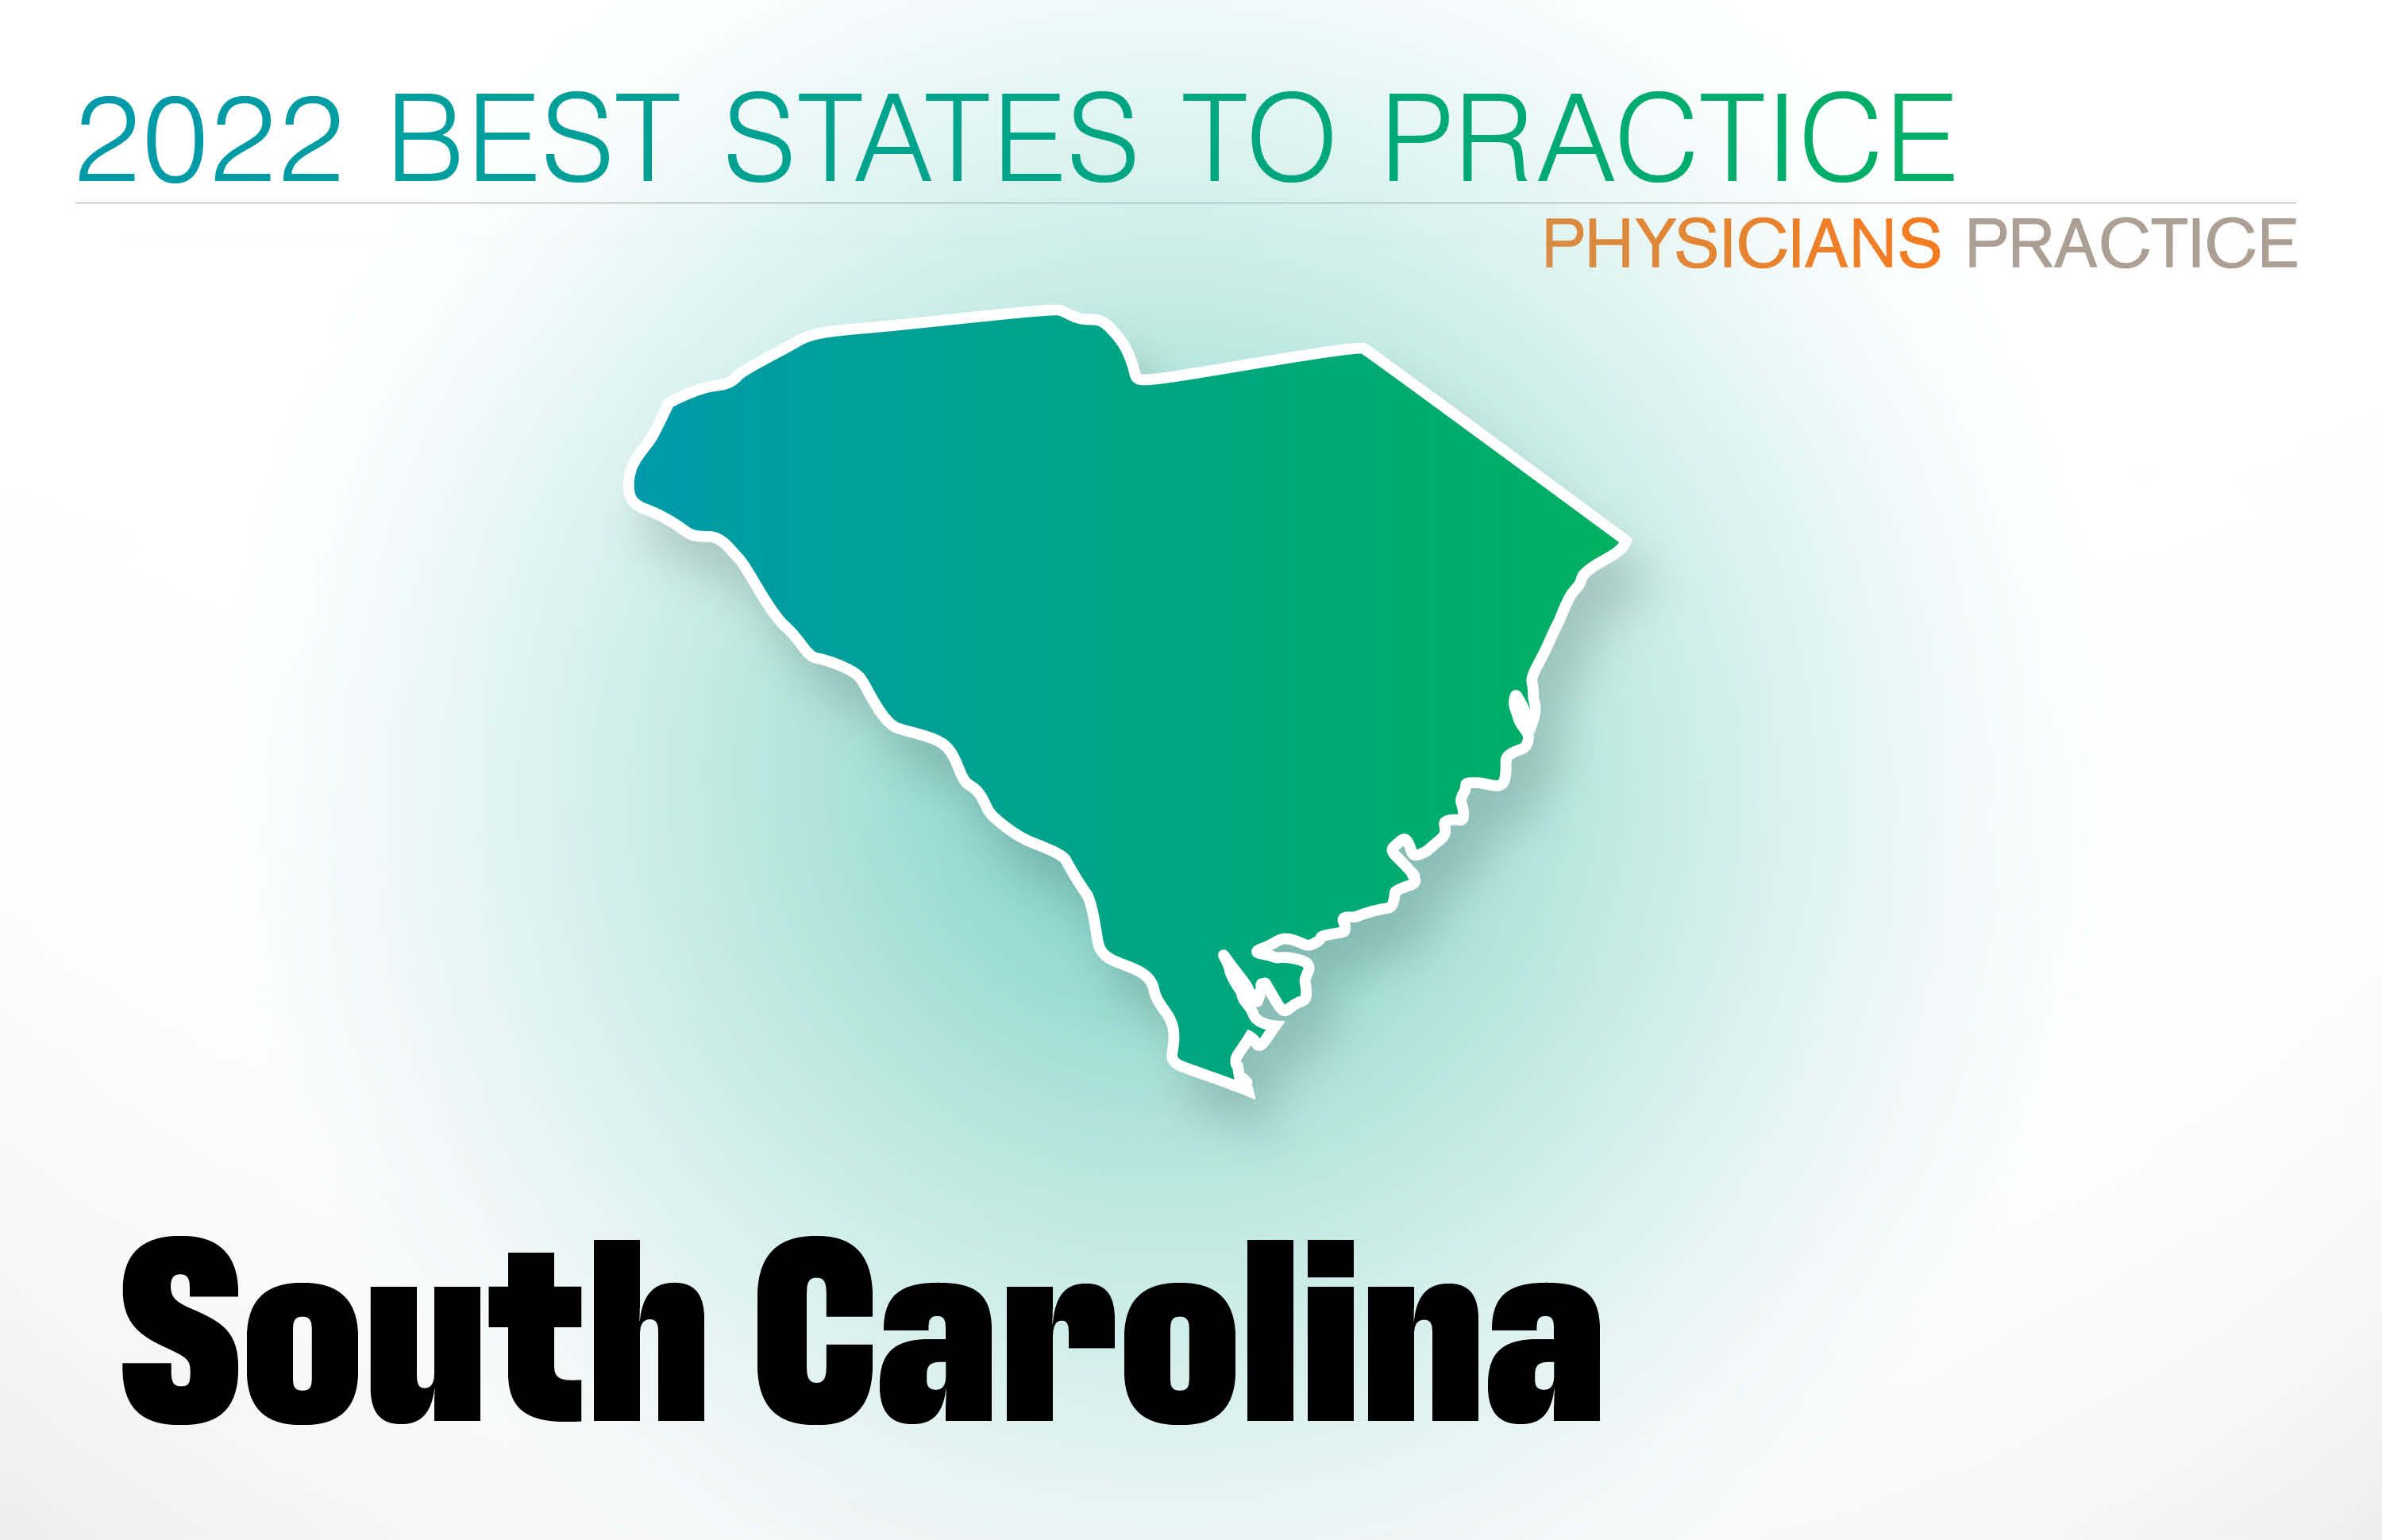 #14 South Carolina Rankings: Cost of living: 20 Physician density: 15 Amount of state business taxes collected: 31 Average malpractice insurance rates: 23 Quality of life: 12 GPCI: 15